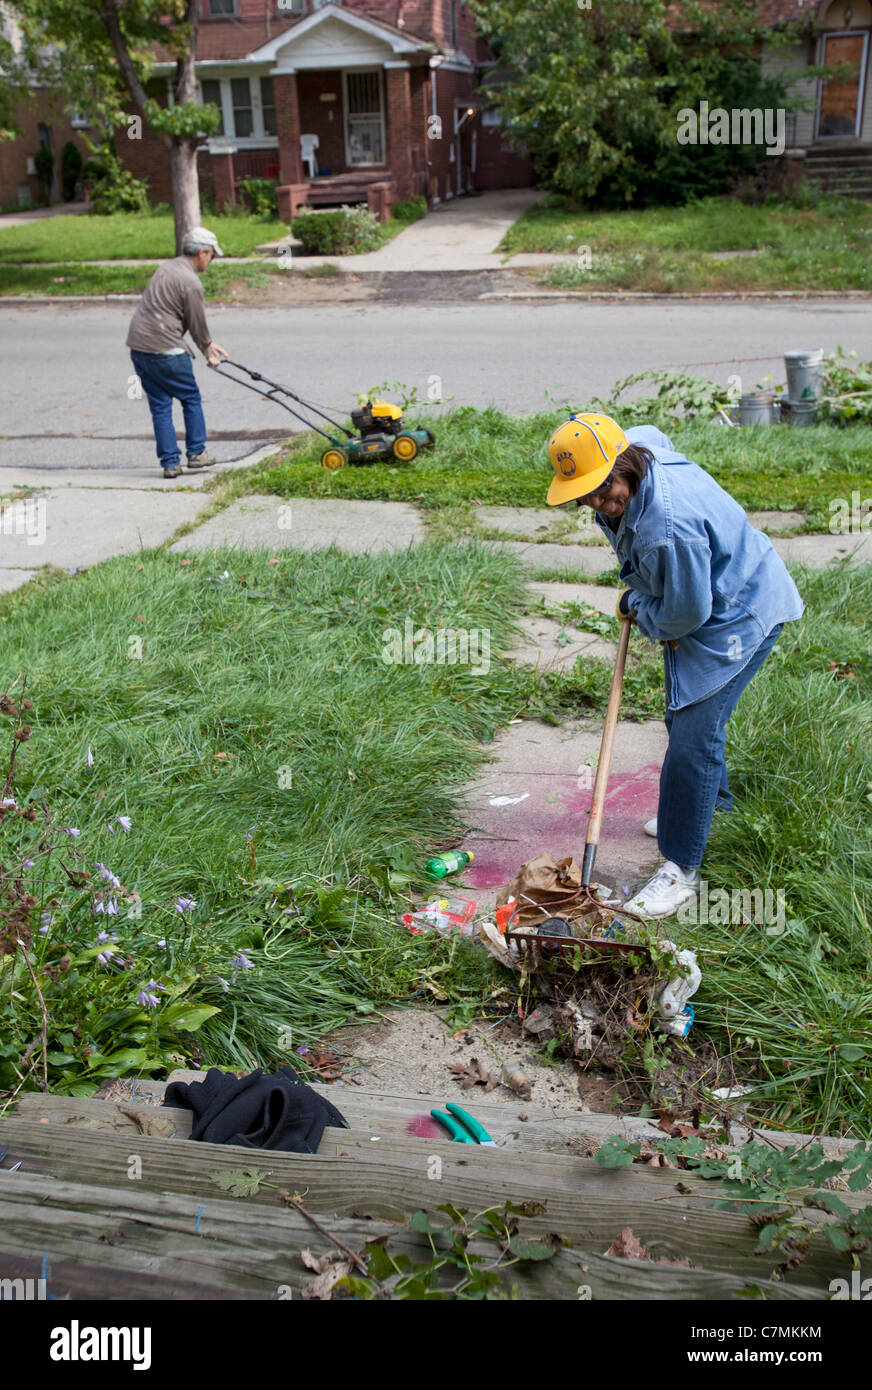 Detroit, Michigan - Members of the Three Mile Drive block club clean trash and weeds from a vacant home in their neighborhood. Stock Photo